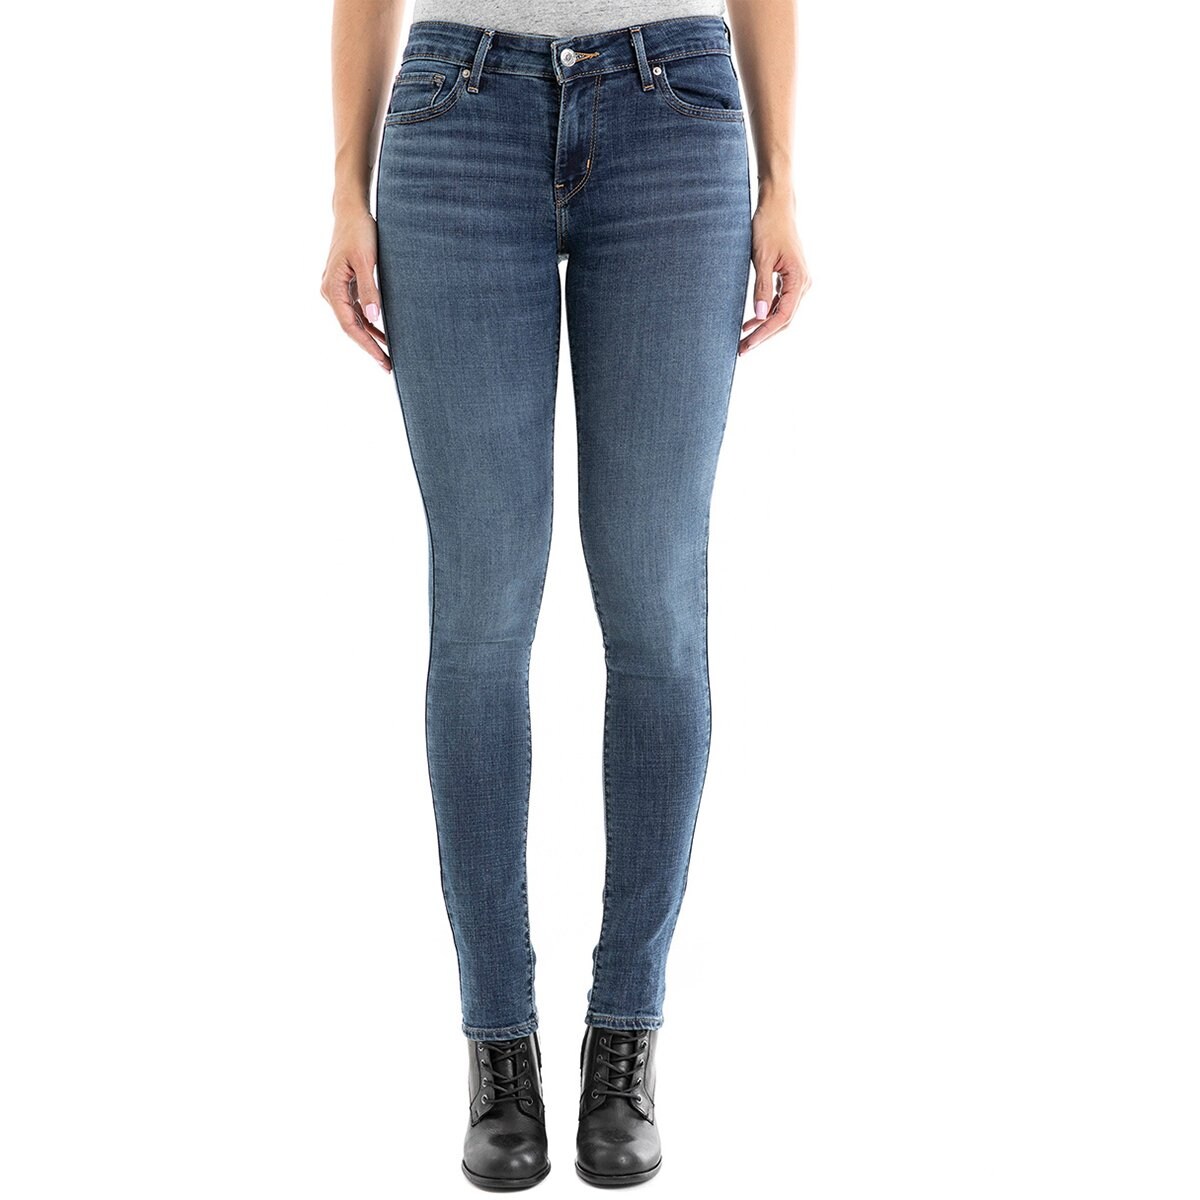 jeans-711-skinny-levis-para-mujer